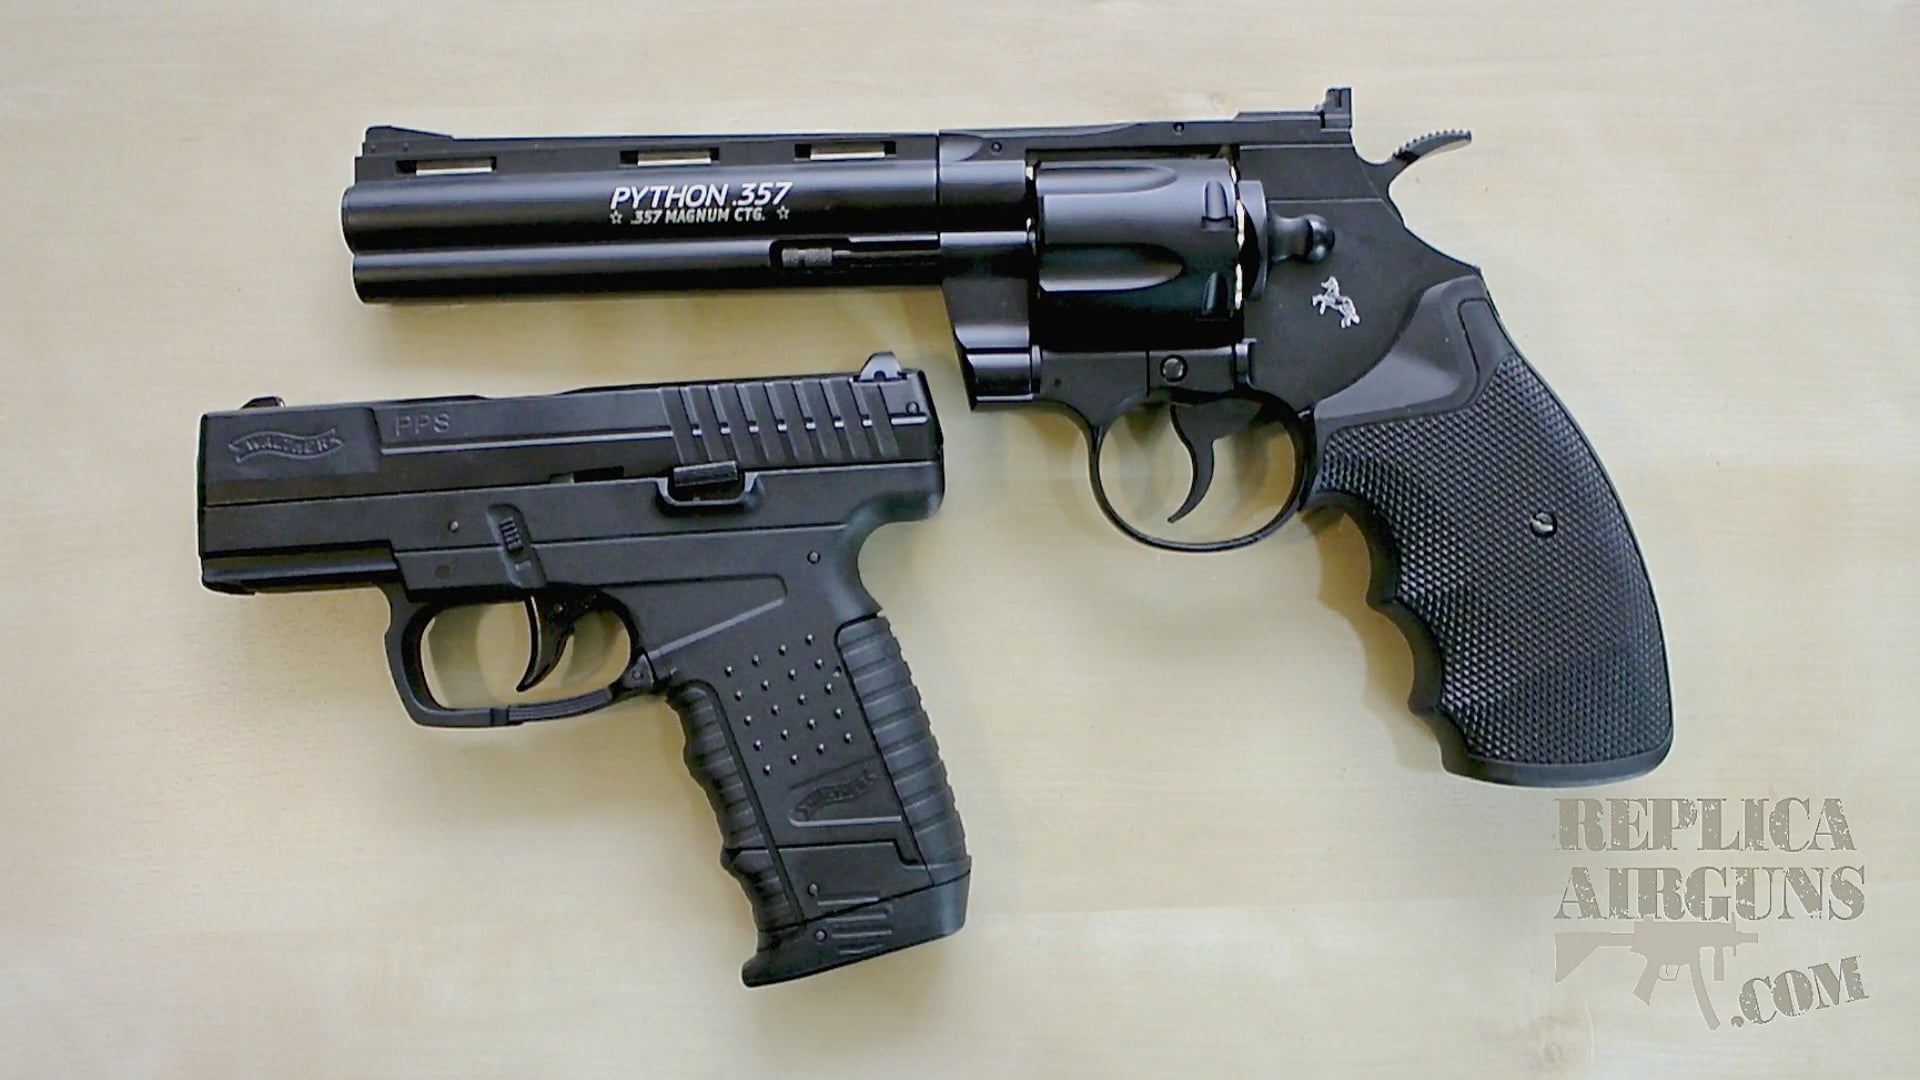 Umarex Walther PPS and Colt Python 357 CO2 BB Pistol Preview Video